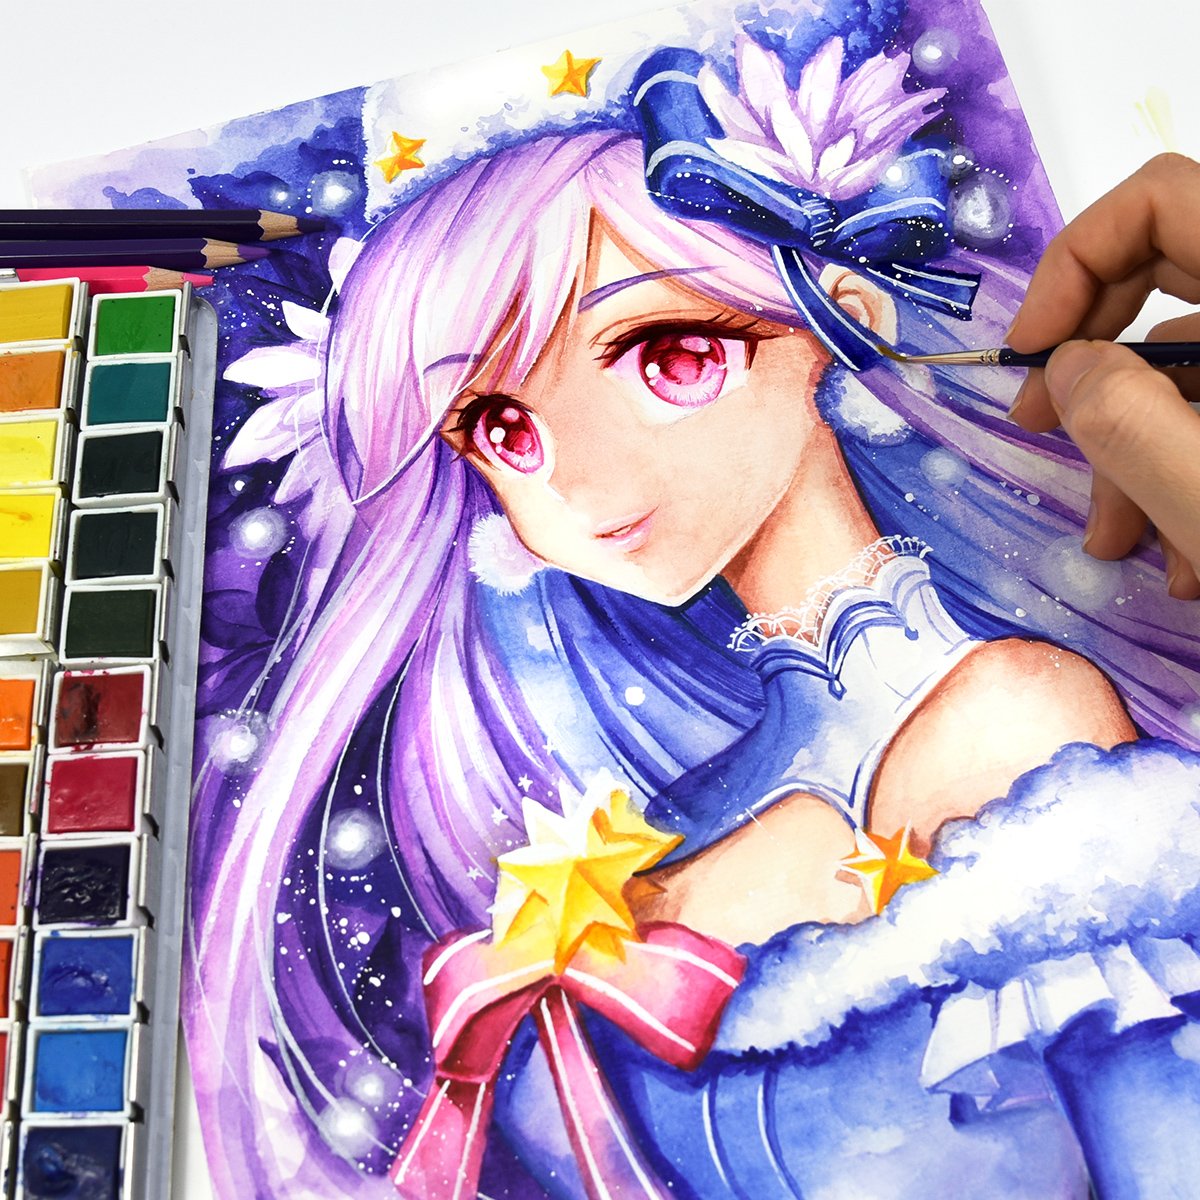 🍊 Nashi 🍋🍉🍇🍓 On Twitter: "My New Illustration For You Is A Snowprincess ❄🎀 I Did Her With My New #Arteza Watercolors 💕 It's Part Of My Jan. Term B Reward On